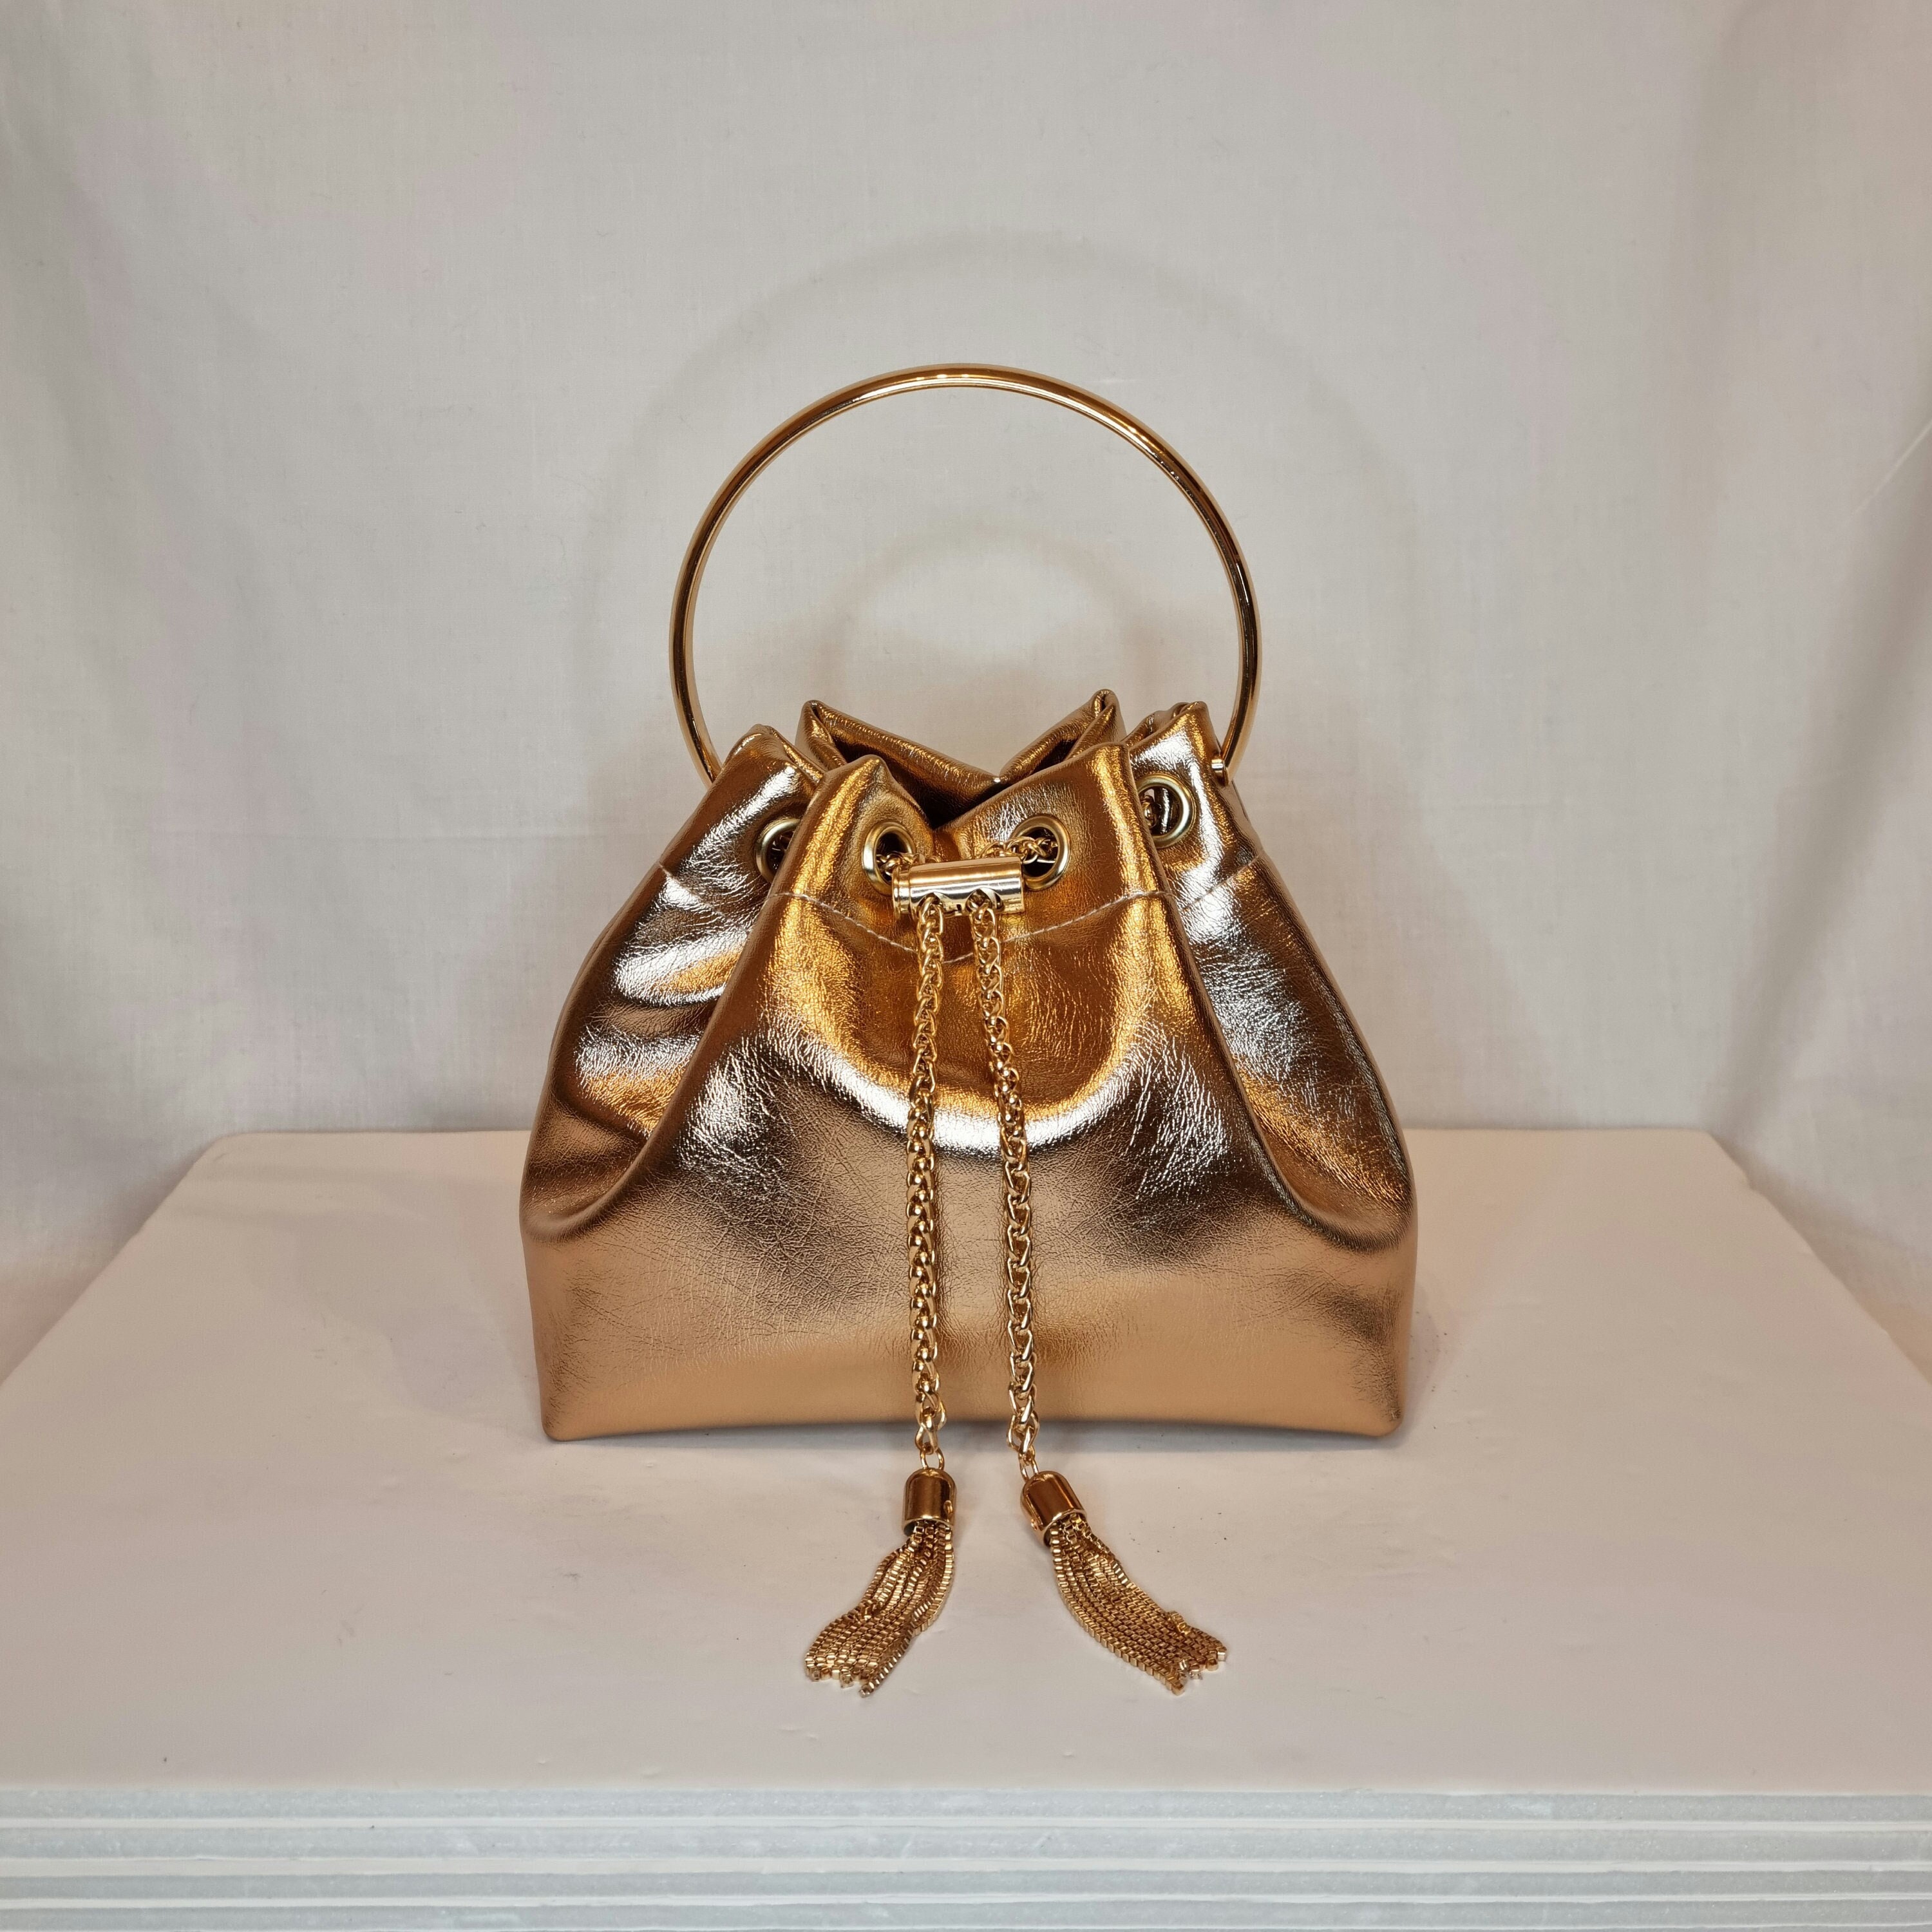 3/16 Leather Drawstring, Cream Patent Cord-drawstring Lace-leather